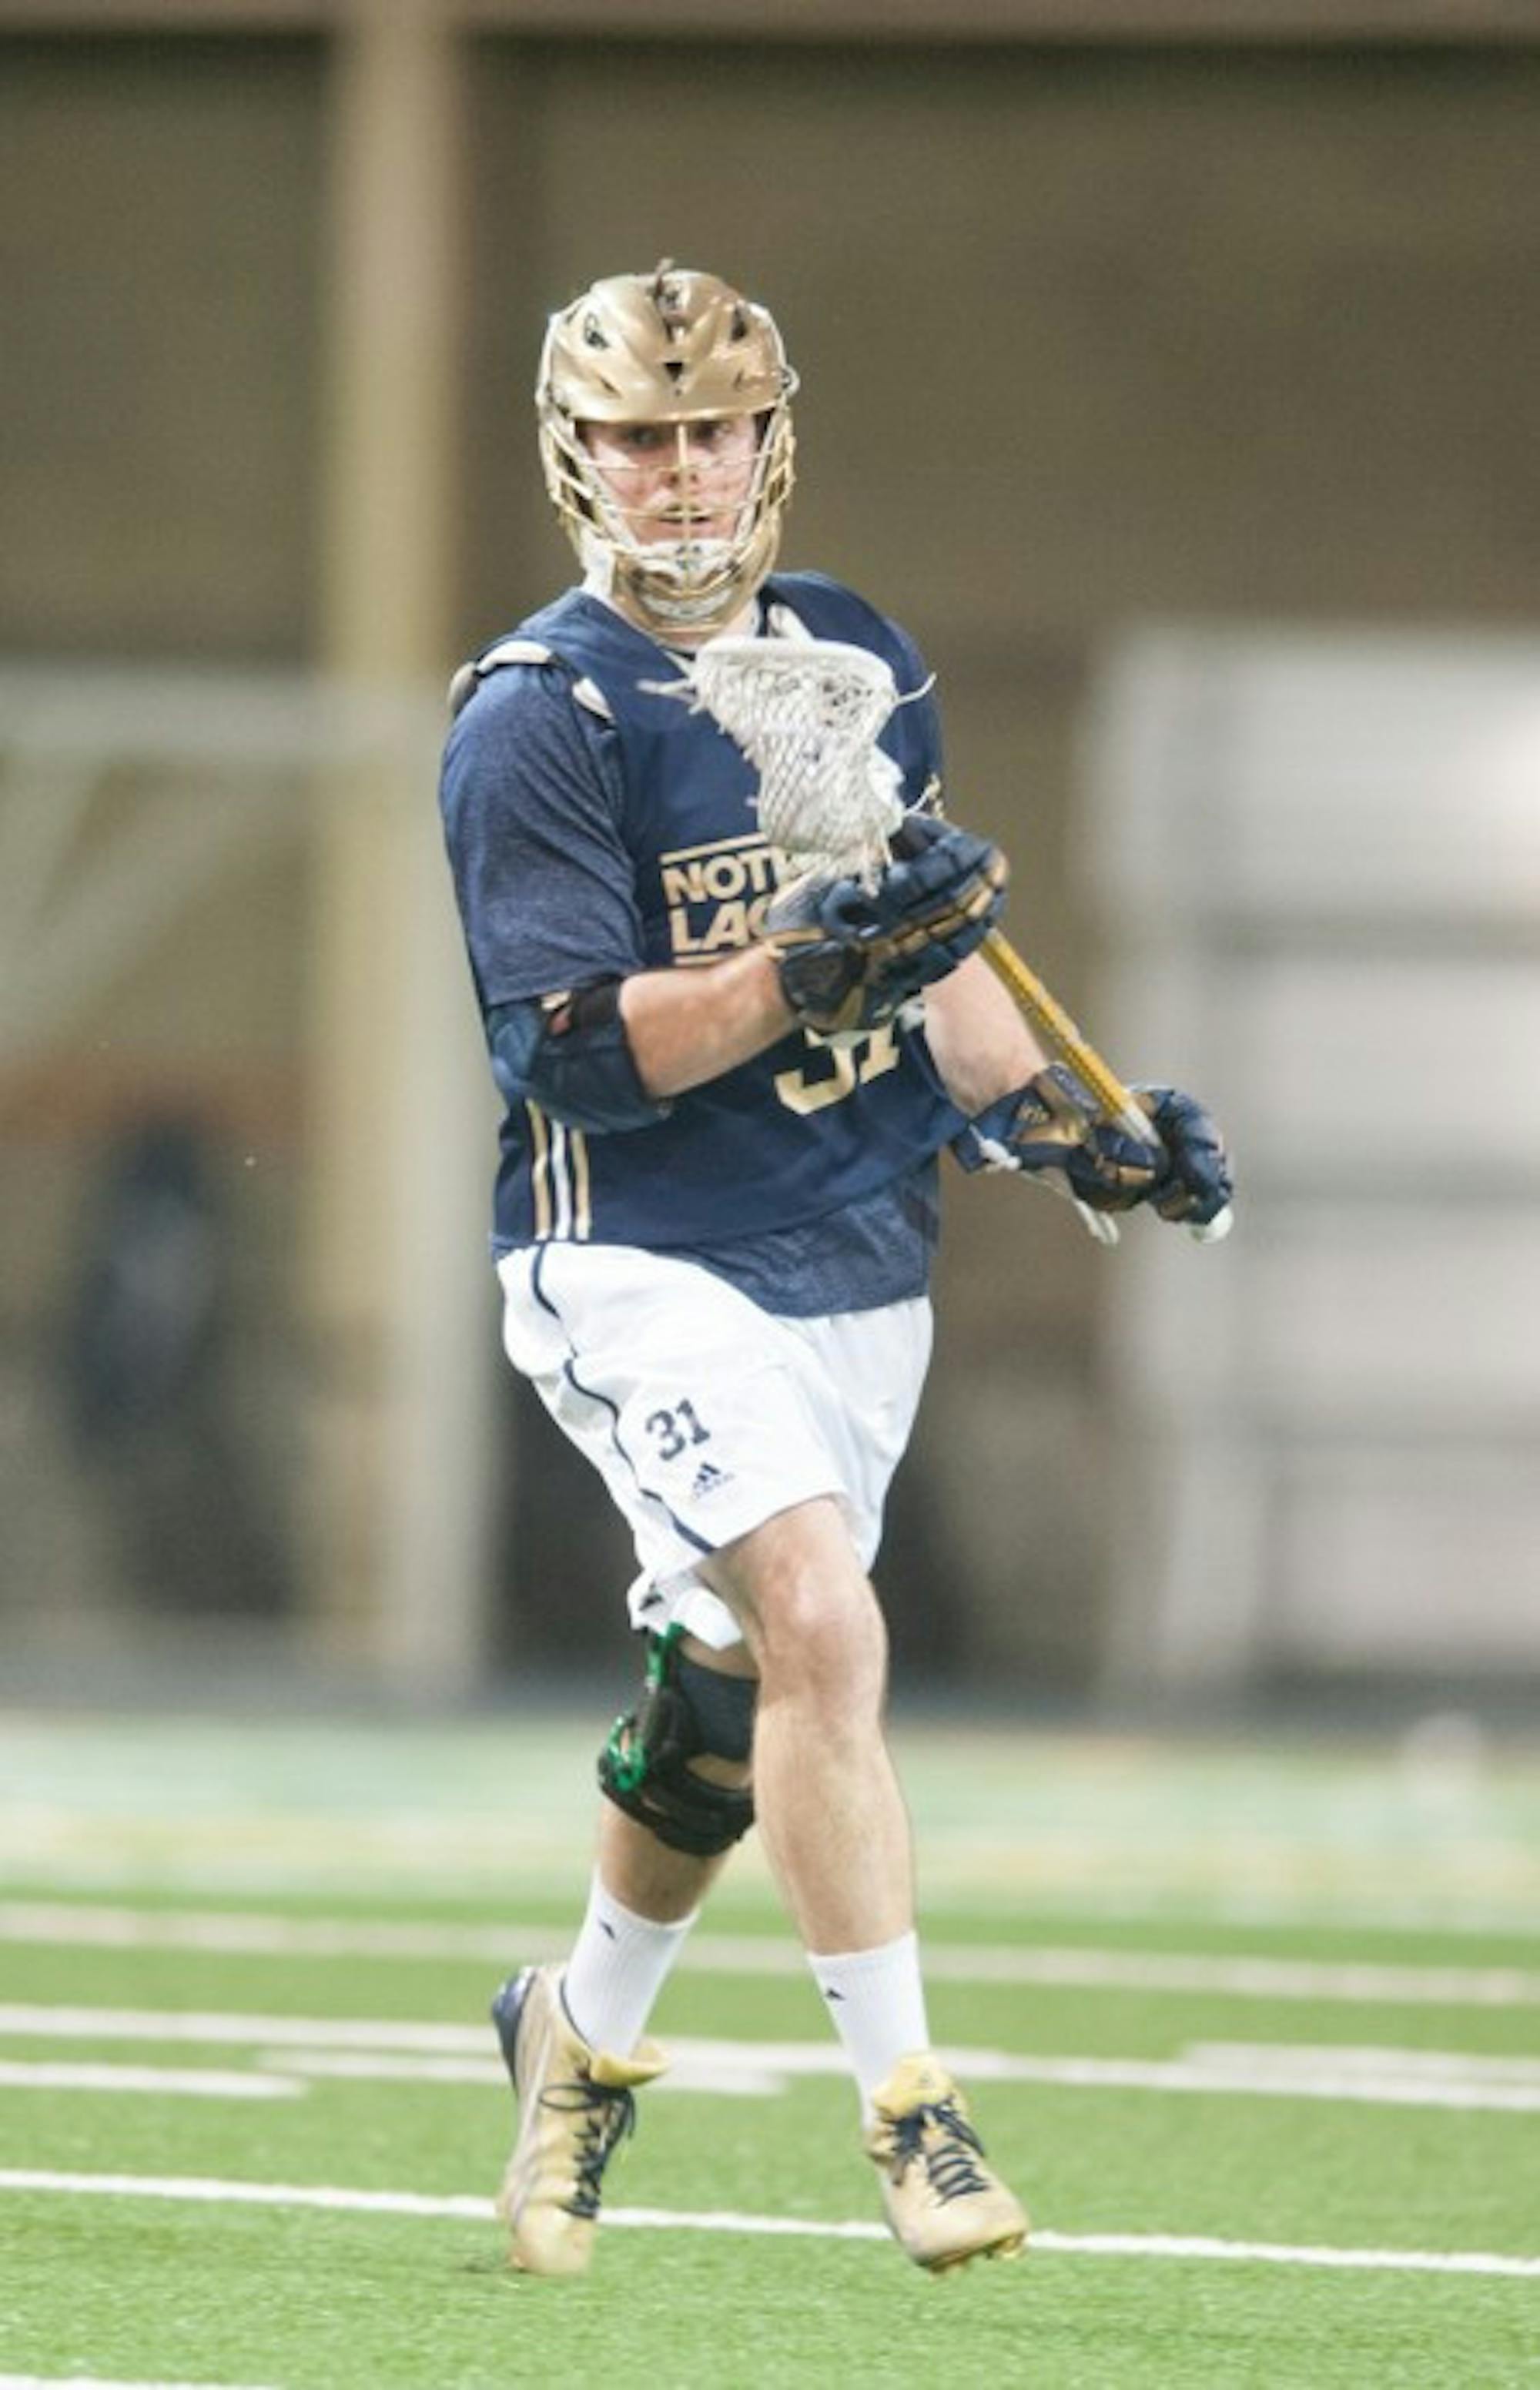 Irish midfielder Liam O’Connor moves upfield in a scrimmage against Detroit on February 2. The senior has won 70 percent of his faceoffs this season.